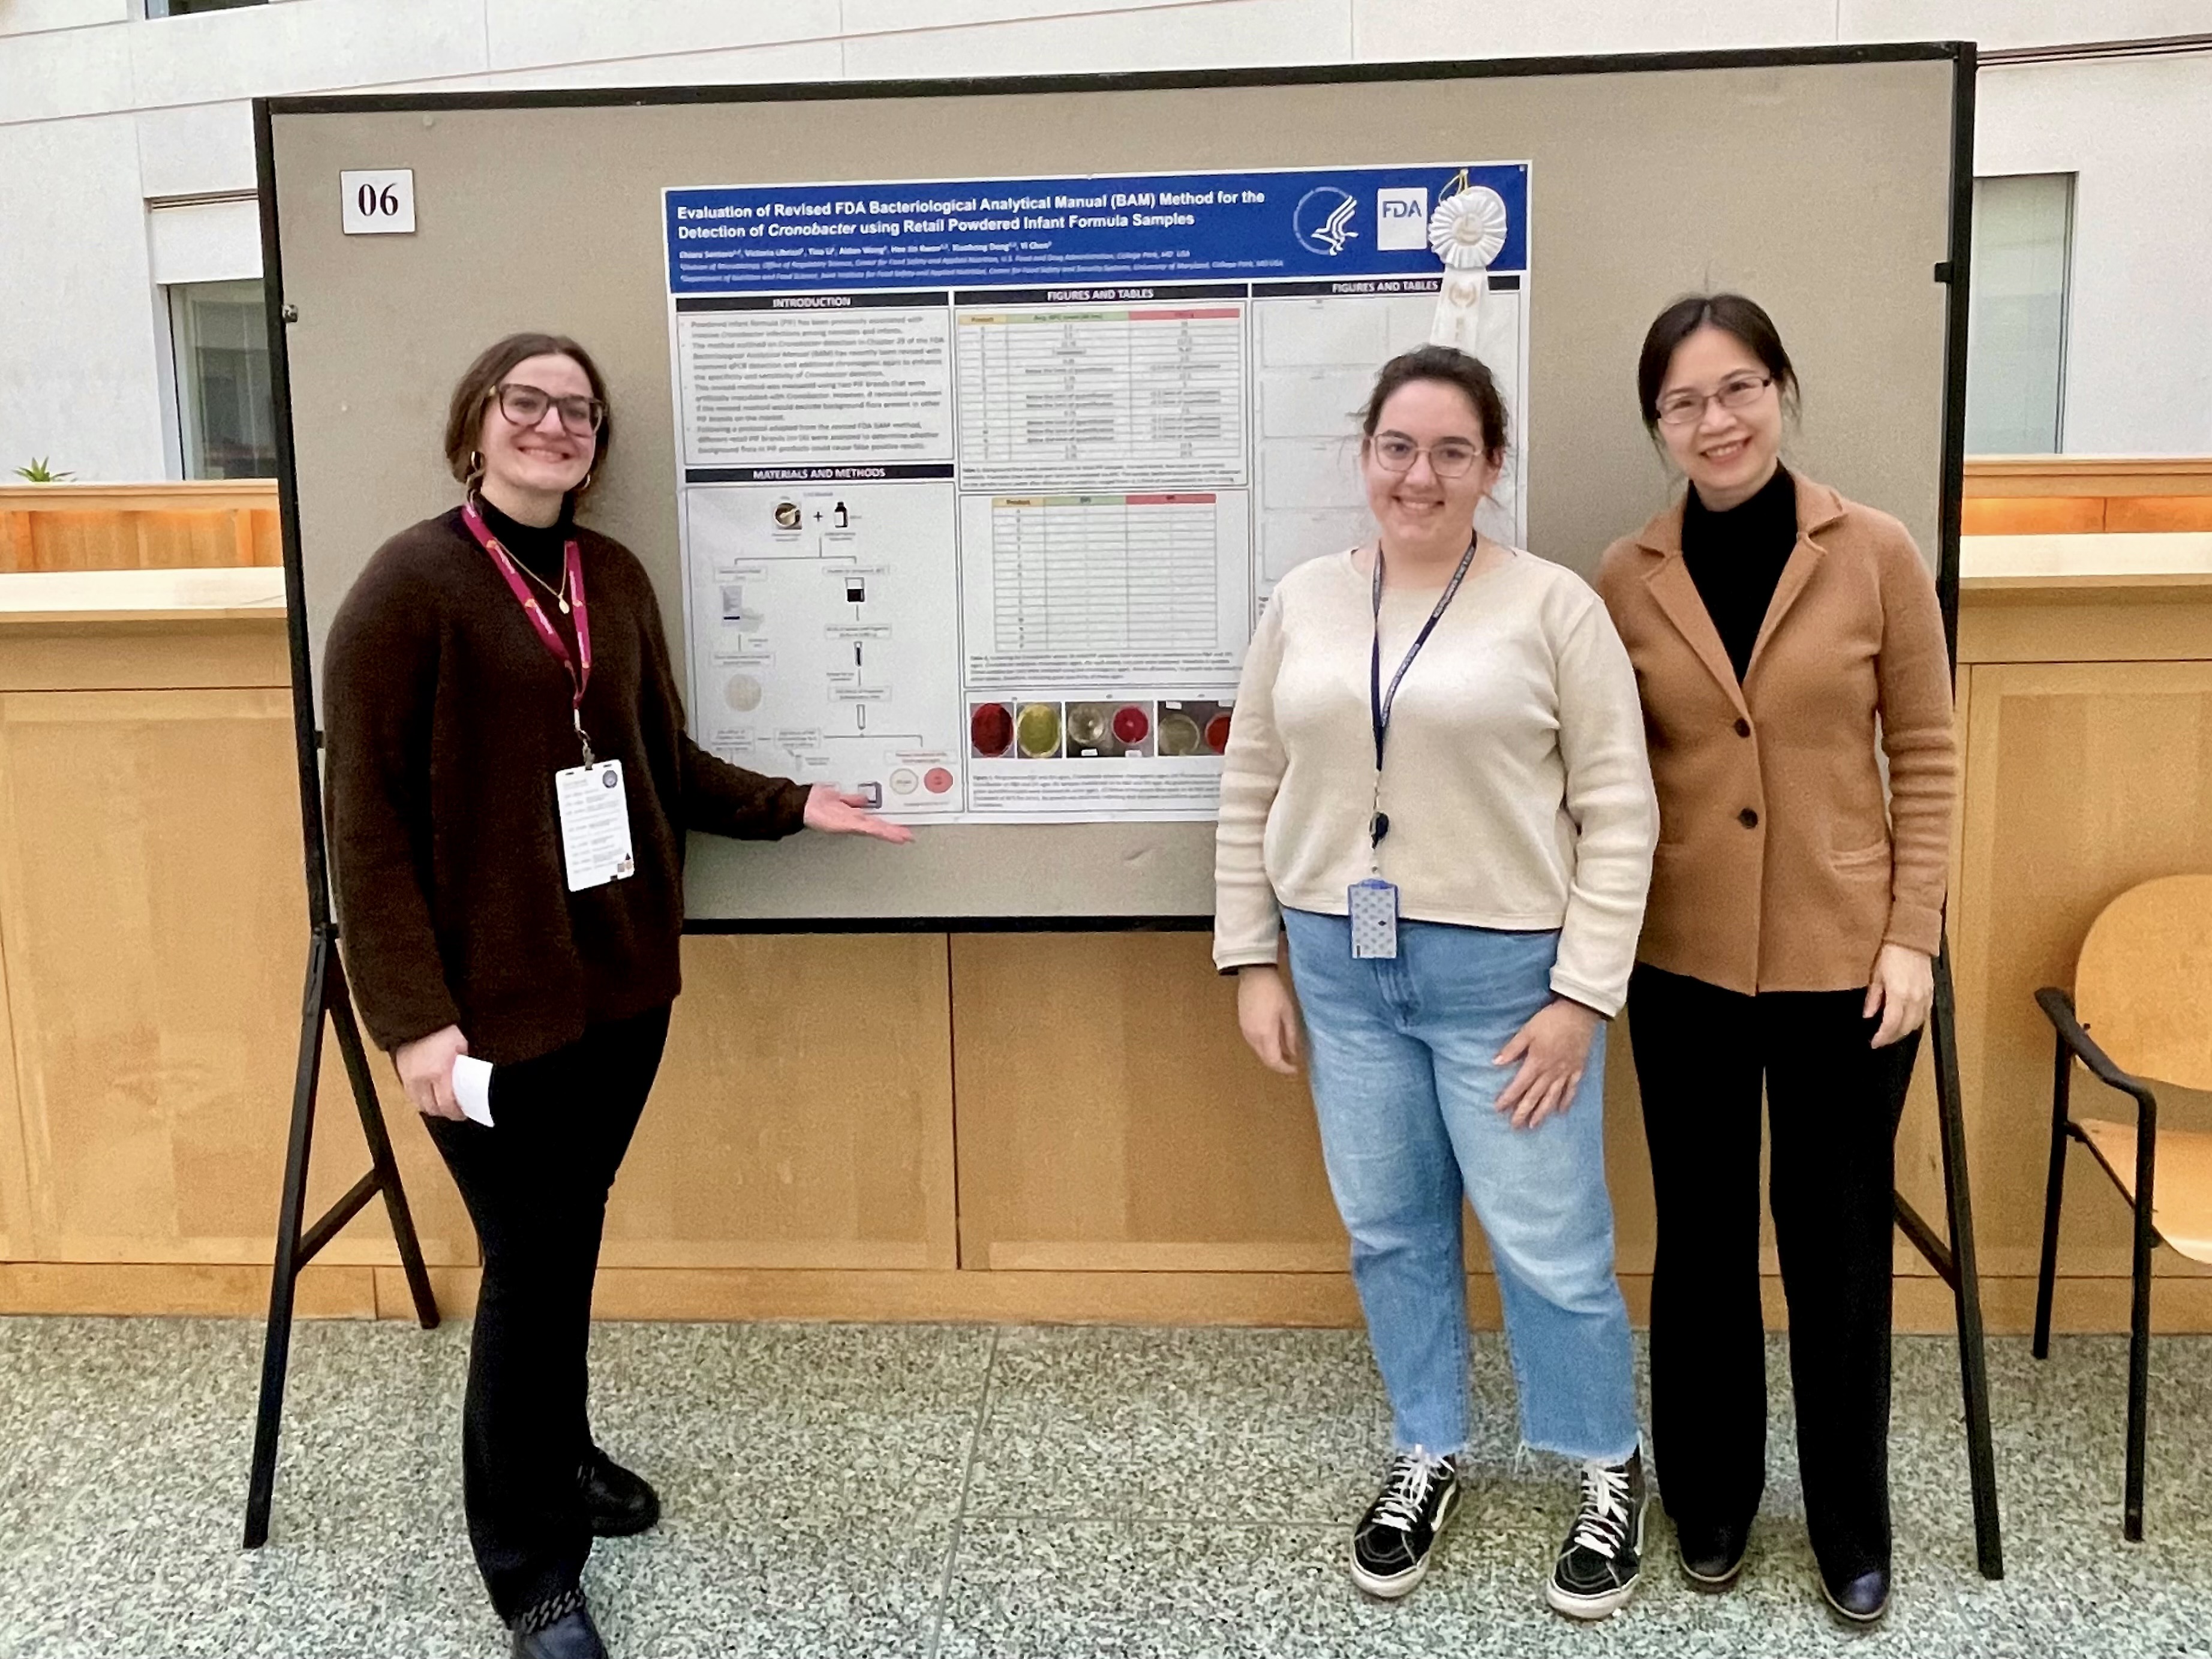 Chiara Santoro with Dr. Yi Chen and fellow labmate present their poster: Evaluation of Revised FDA Bacteriological Analytical Manual (BAM) Method for the Detection of Cronobacter using Retail Powdered Infant Formula Samples.